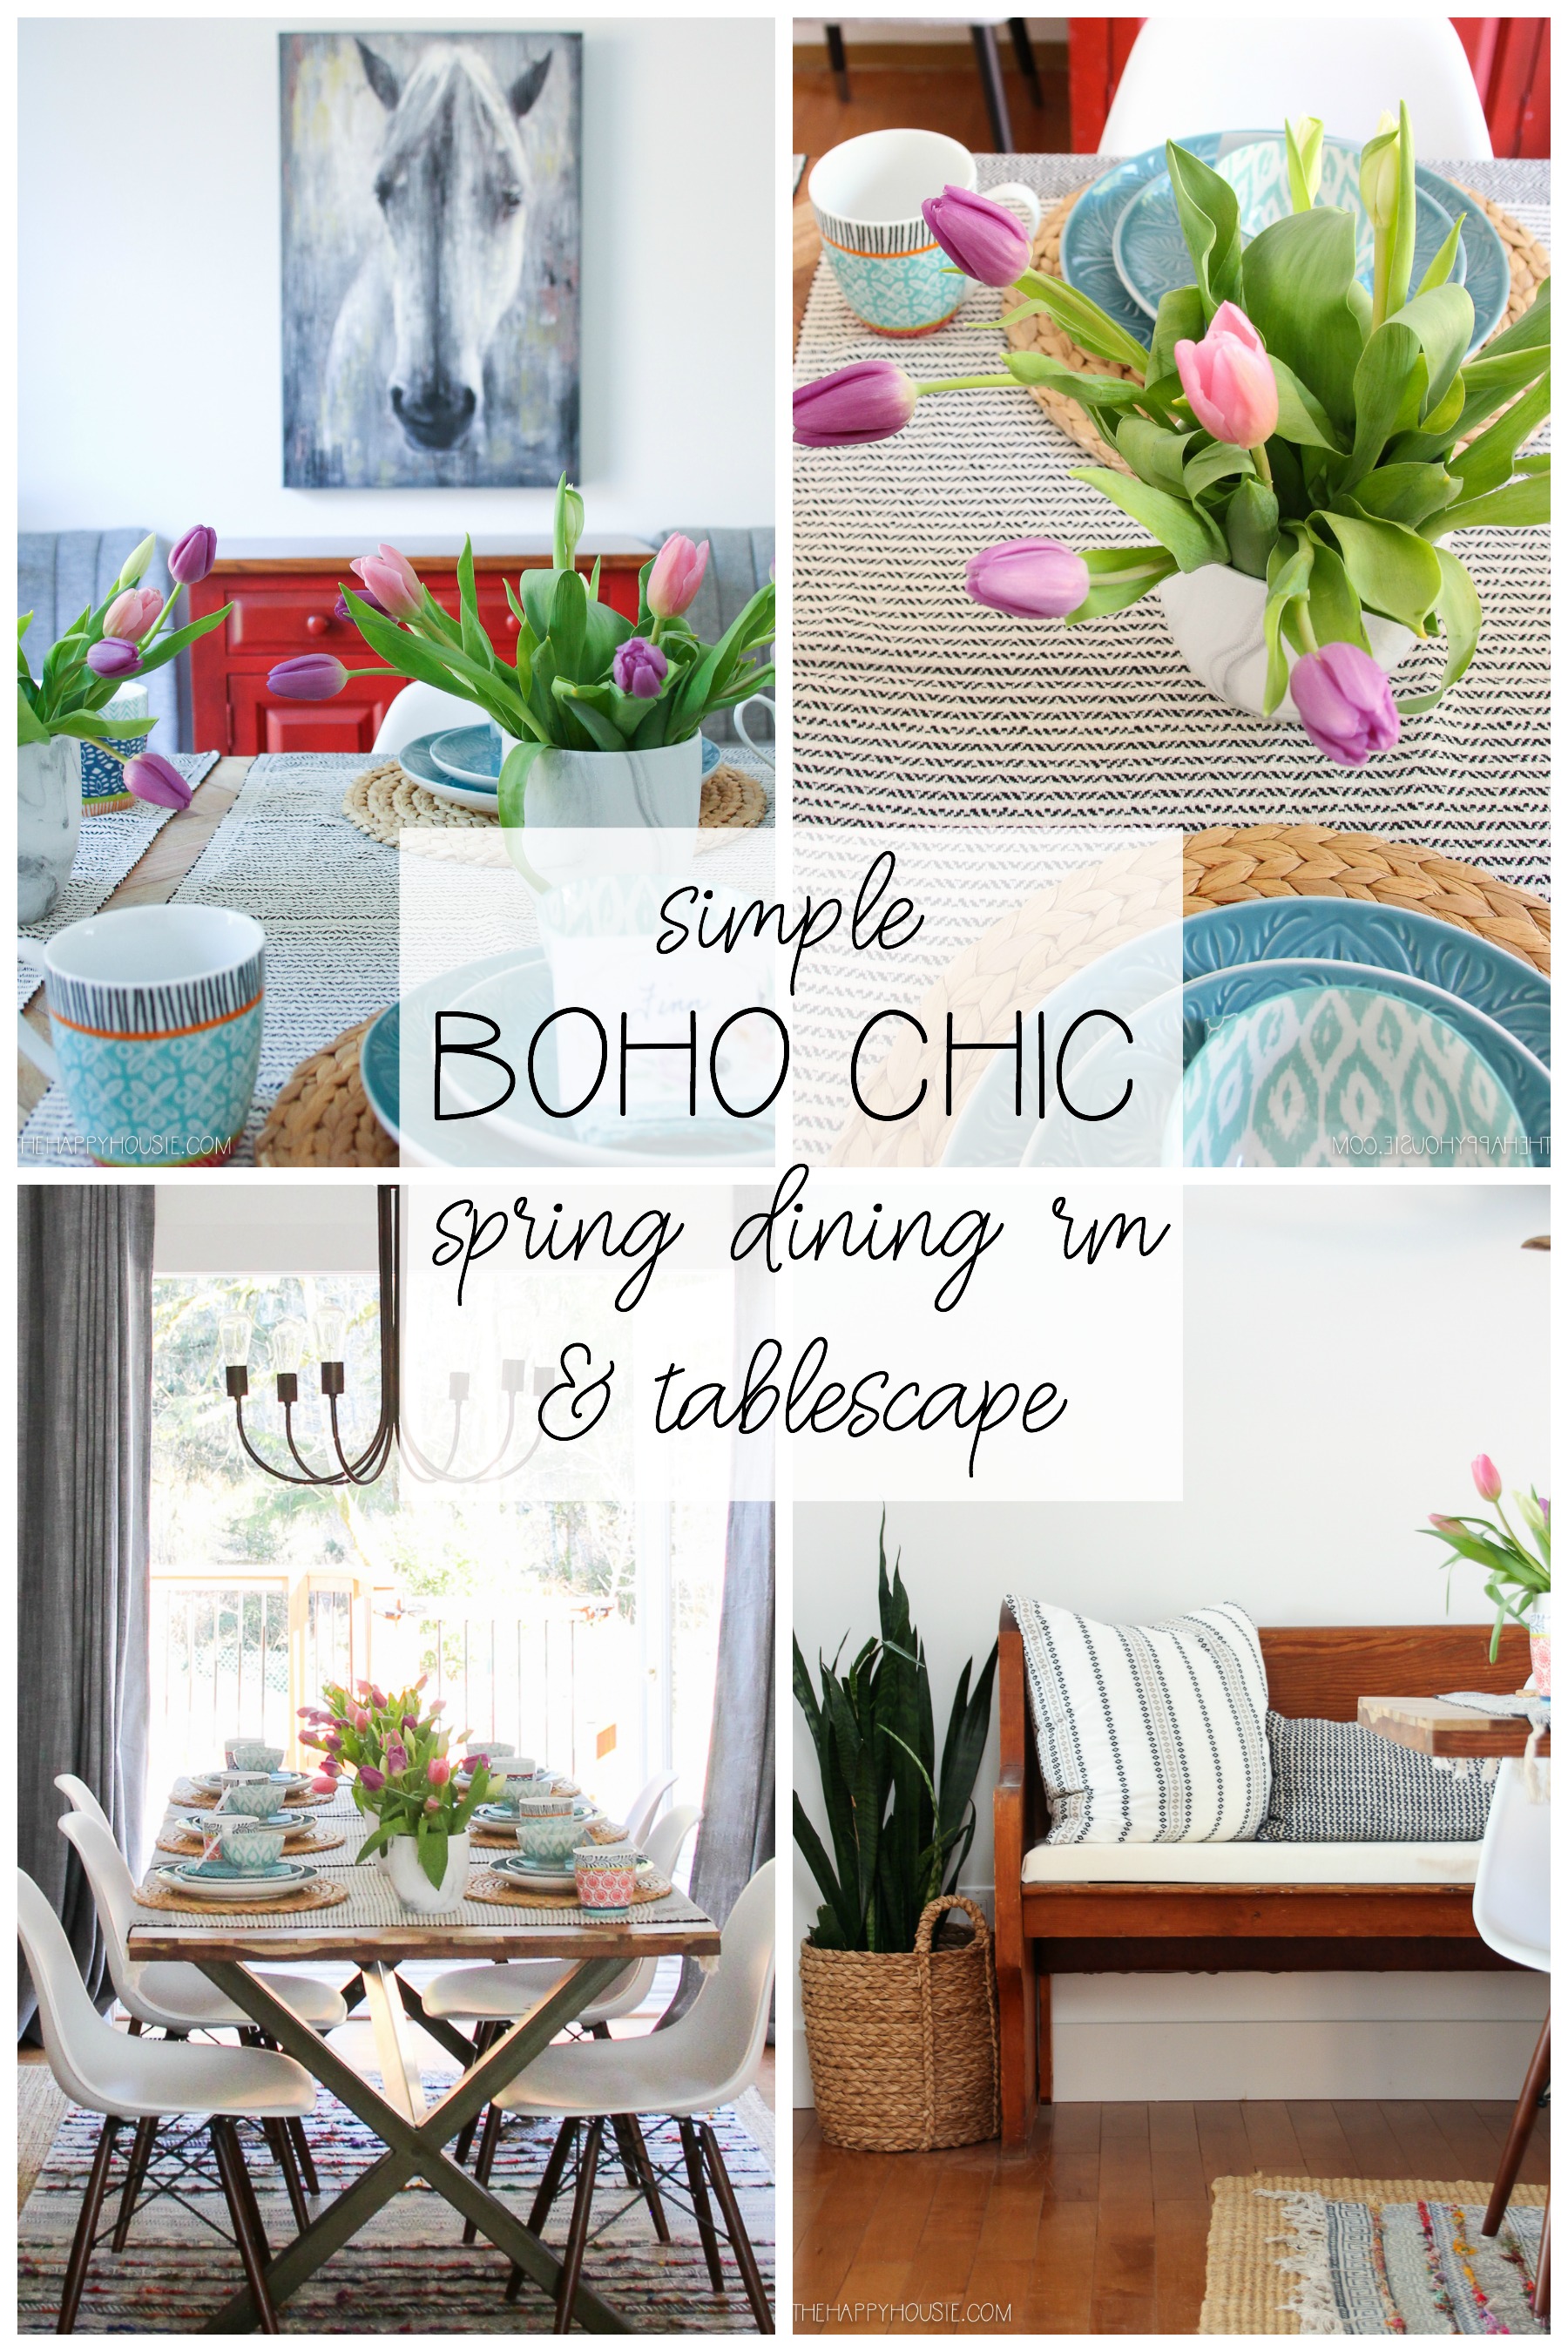 Simple Boho Chic Spring Dining And Tablescape poster.